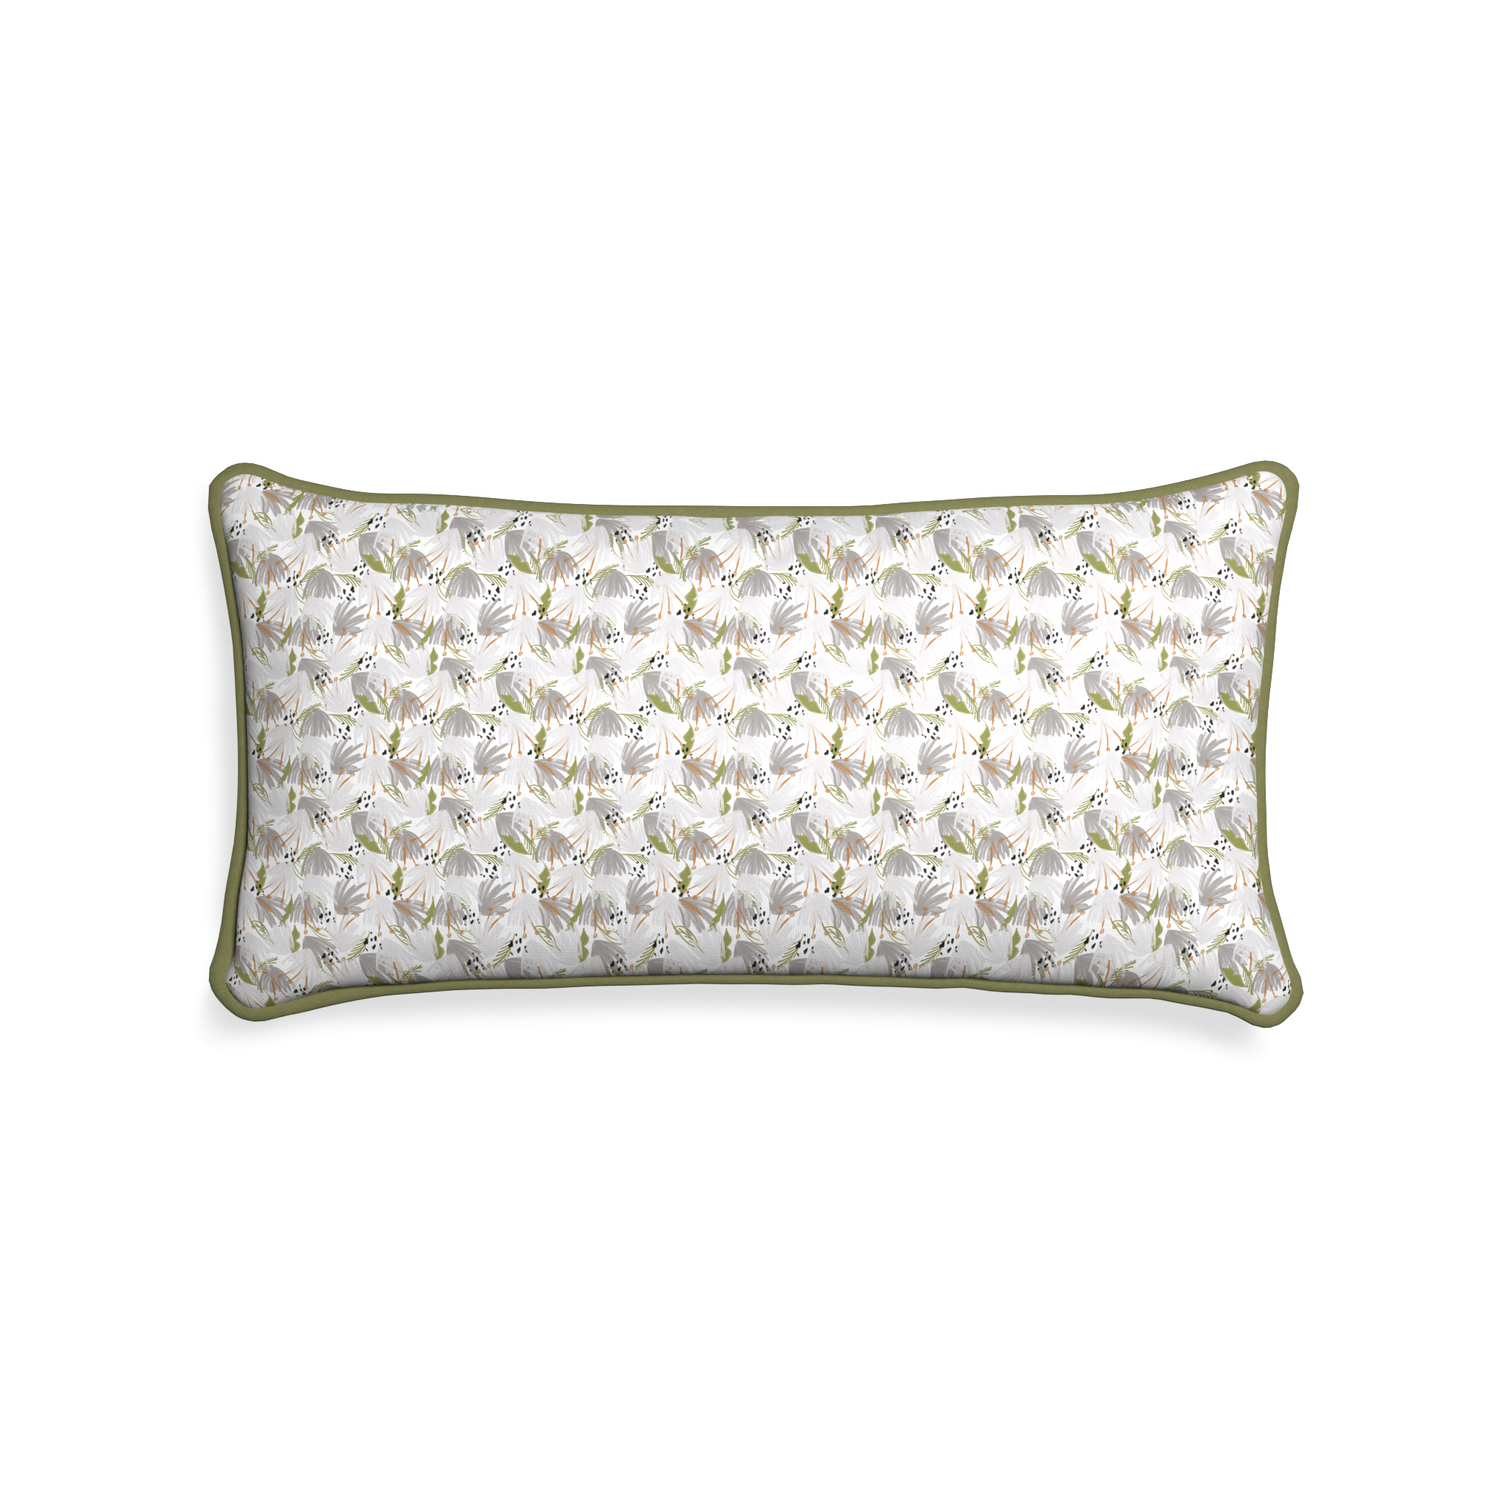 rectangle grey floral pillow with moss green piping